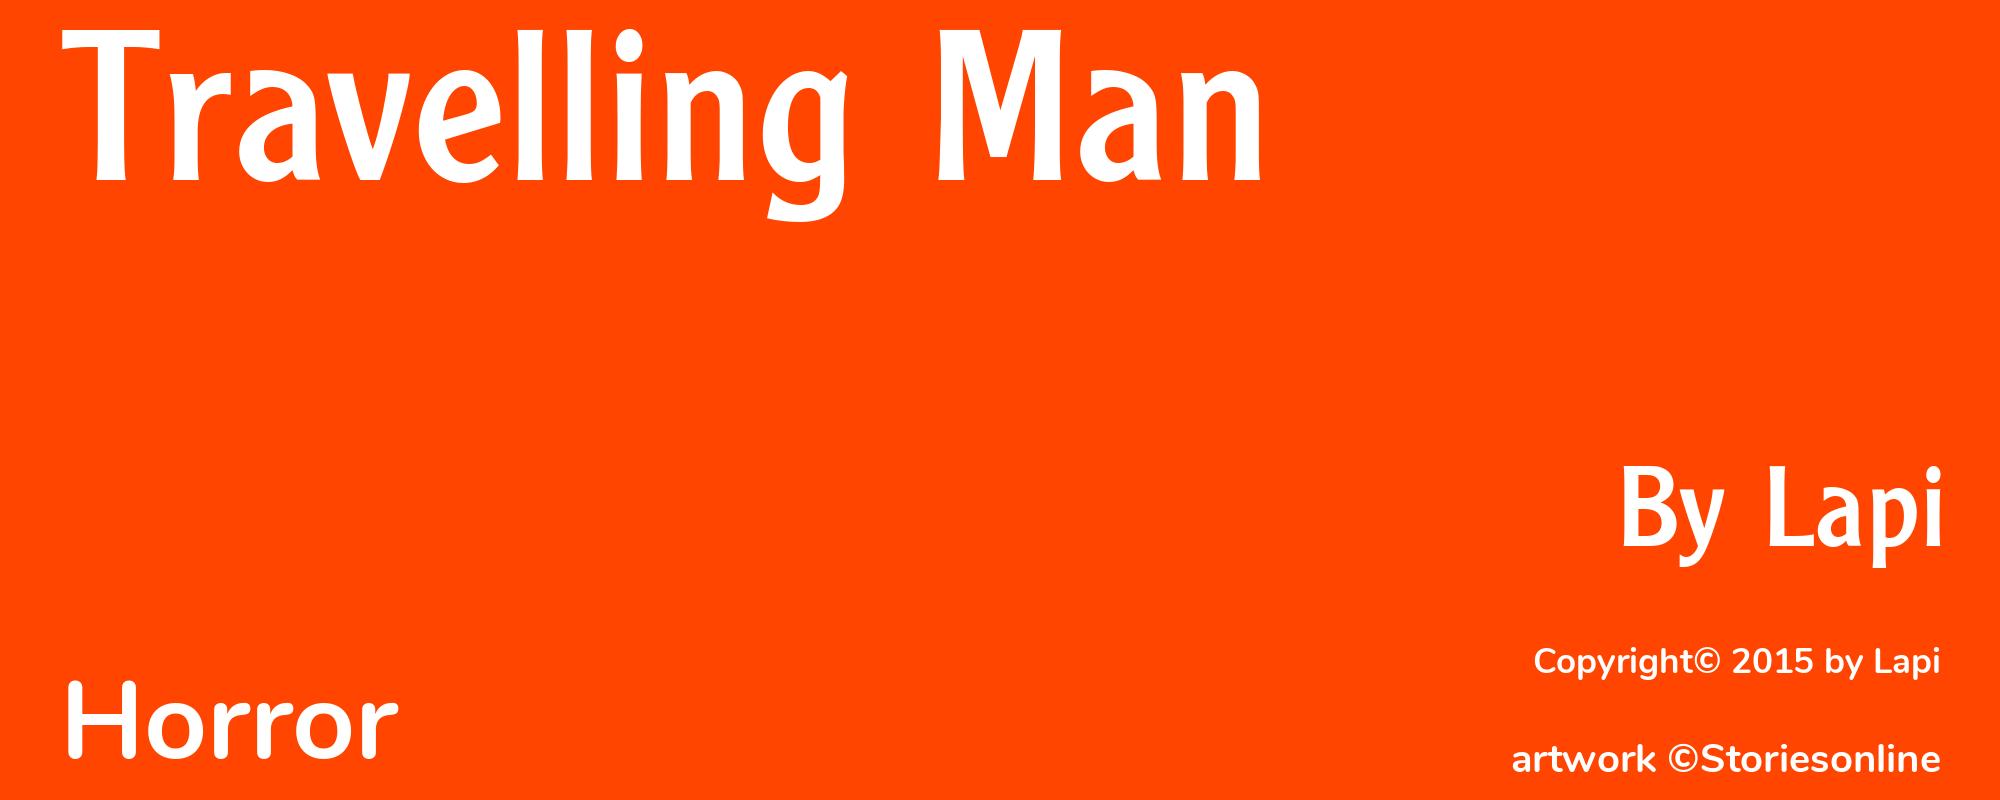 Travelling Man - Cover